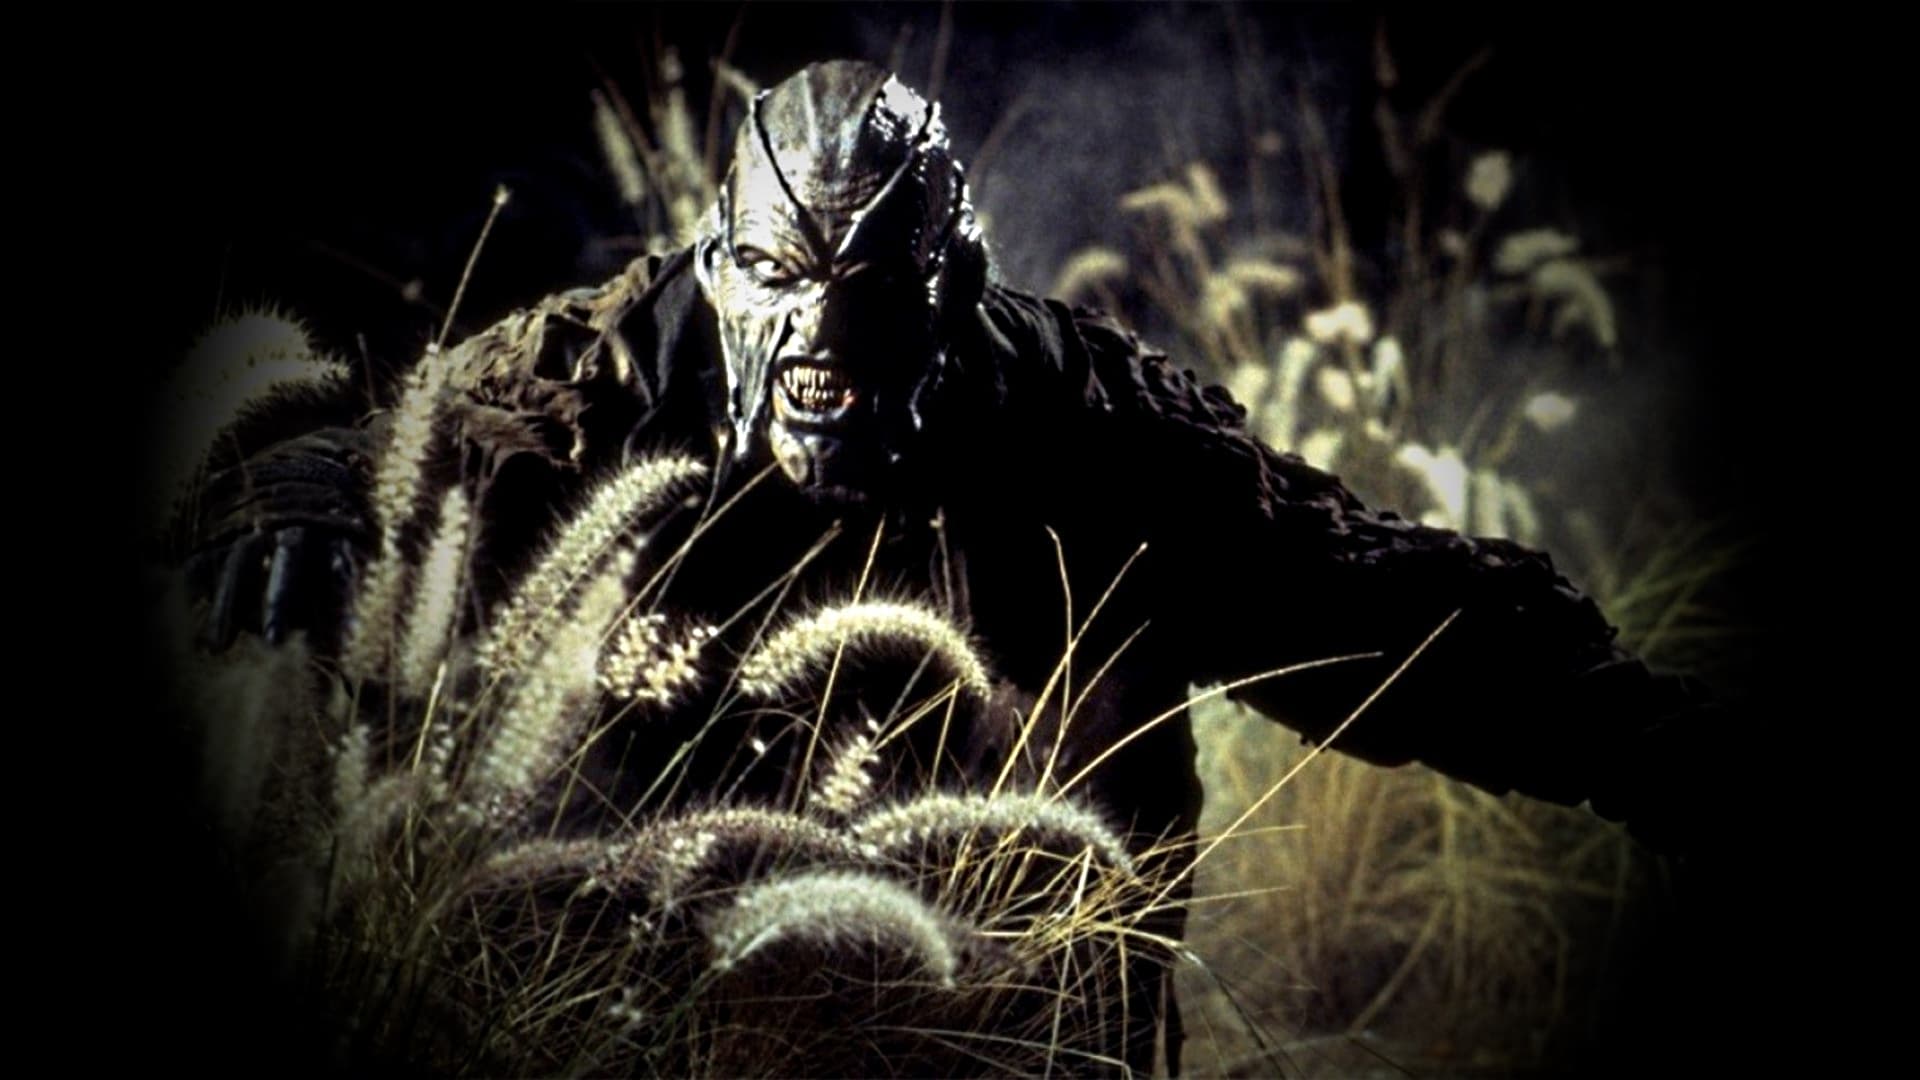 jeepers creepers watch online movie